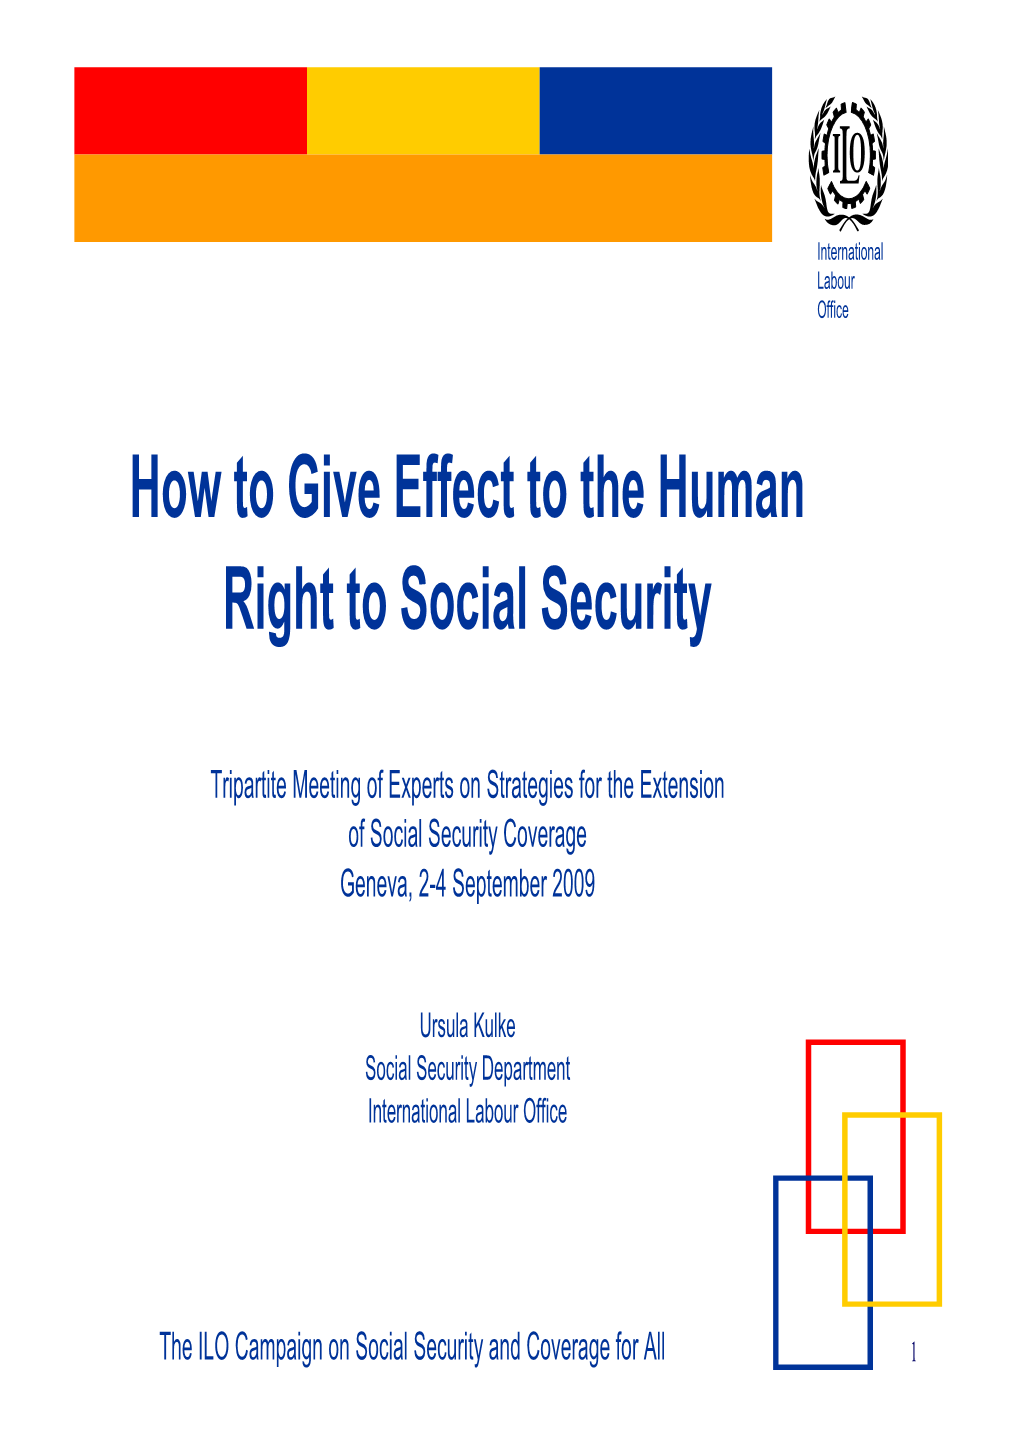 How to Give Effect to the Human Right to Social Security